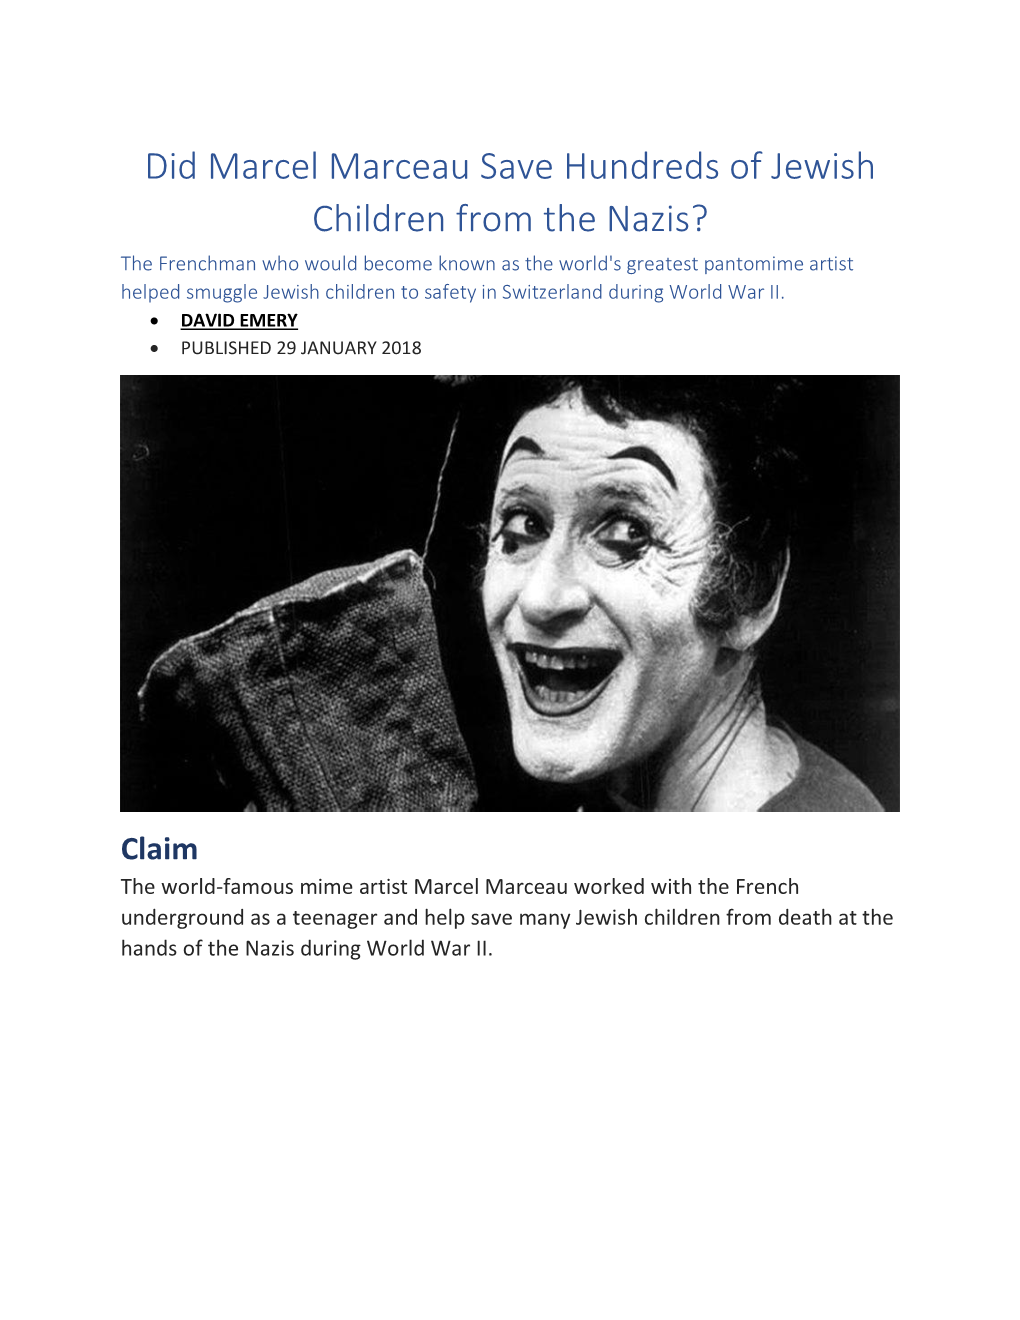 Did Marcel Marceau Save Hundreds of Jewish Children from the Nazis?